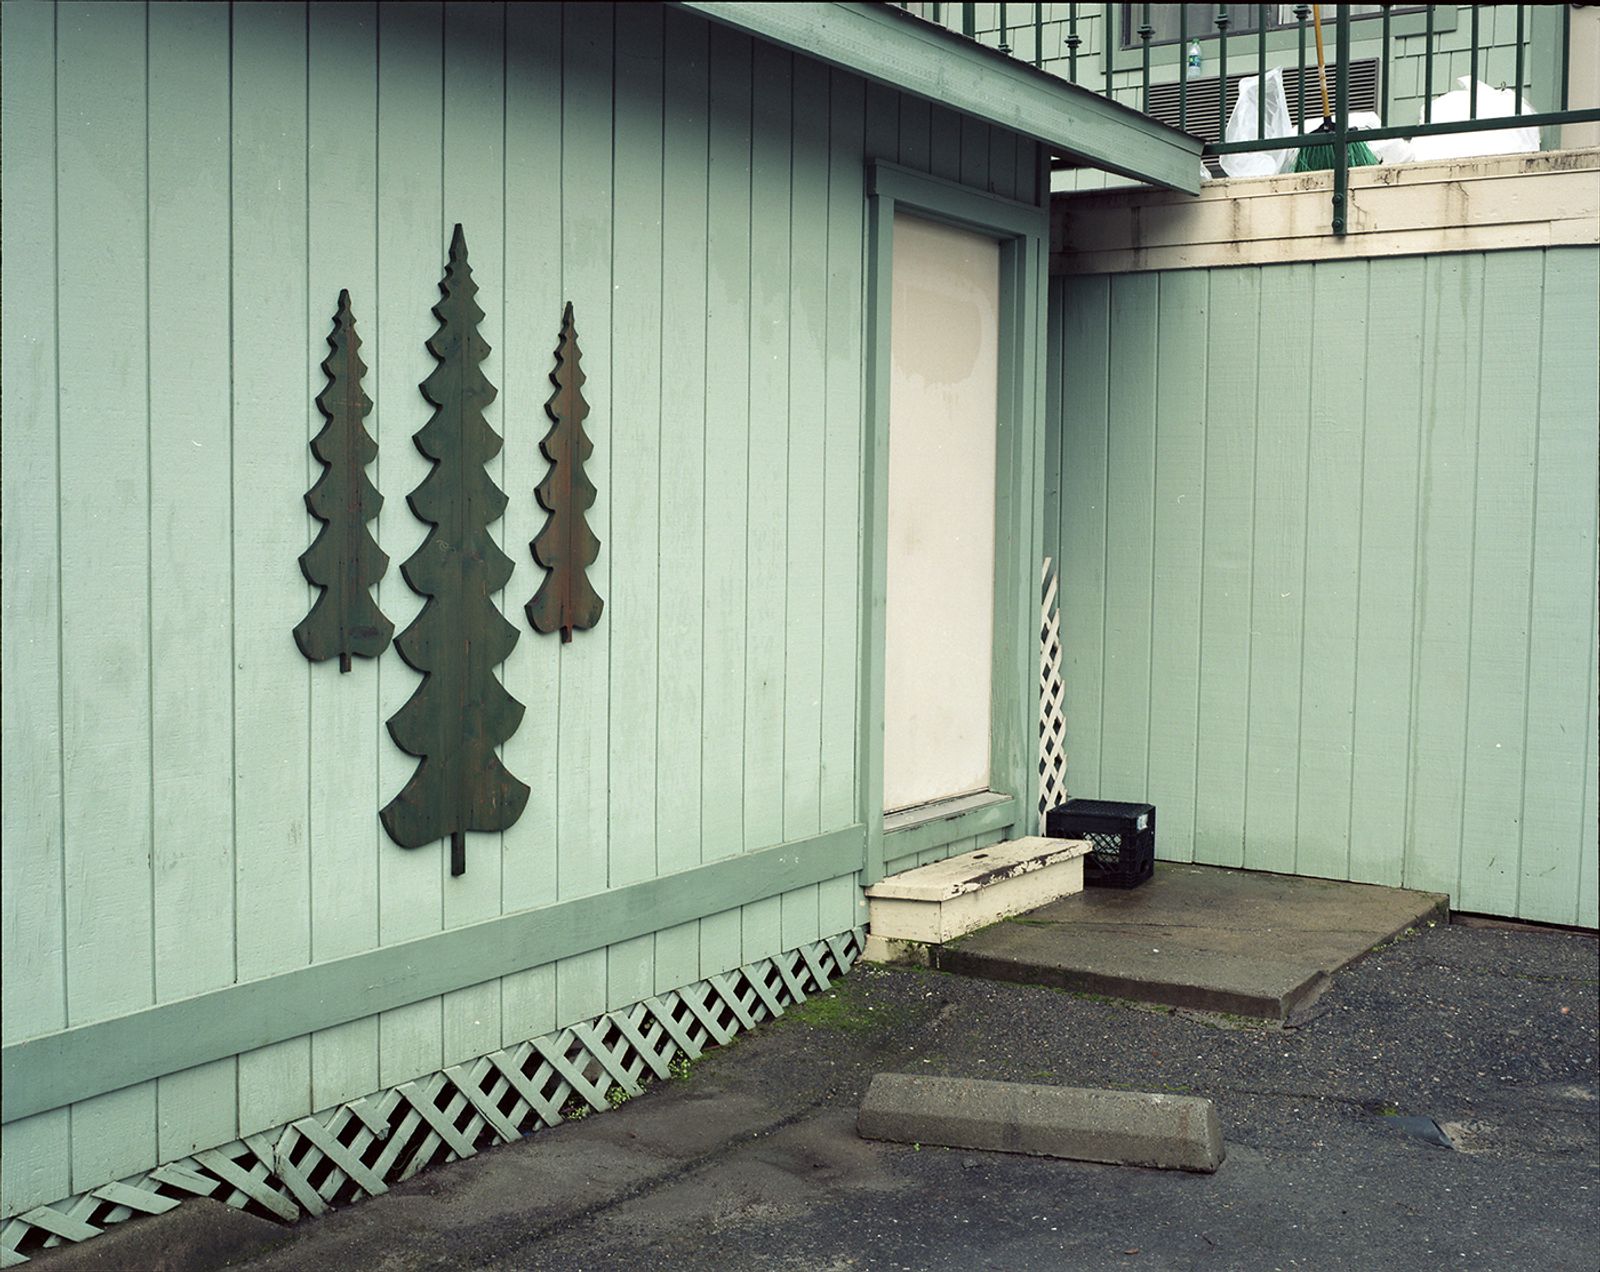 © Maya Meissner - Image from the The Cedar Lodge photography project